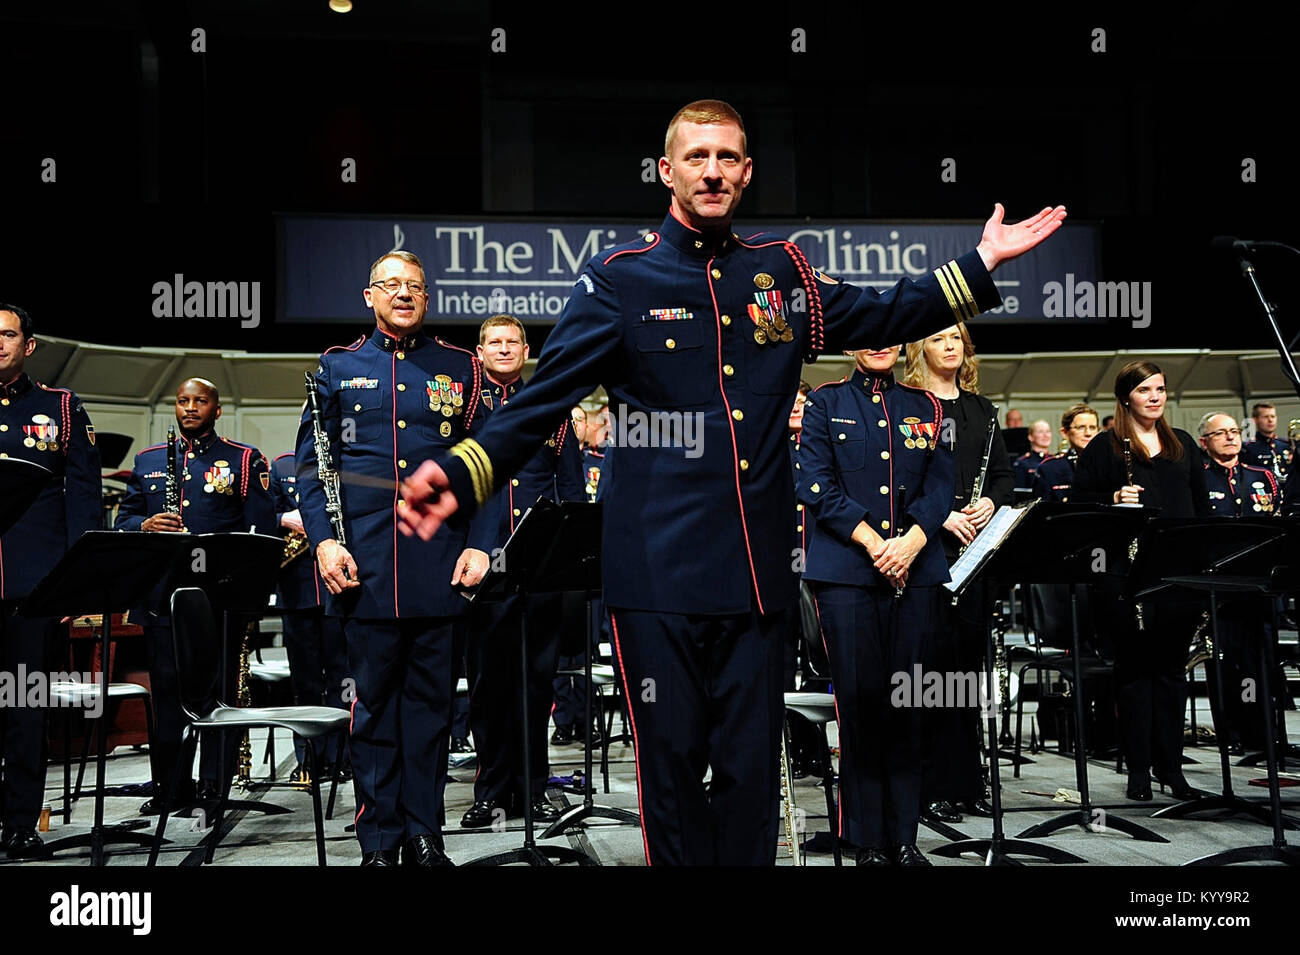 Lt. Cmdr. Adam Williamson and members of the Coast Guard Band acknowledge the audience during a performance in Chicago, Dec. 21, 2017.  The band was the featured service band at this year’s Midwest Clinic International Band and Orchestra Conference attended by more than 17,000 people from all 50 states and more than 30 countries.  (U. S. Coast Guard Stock Photo